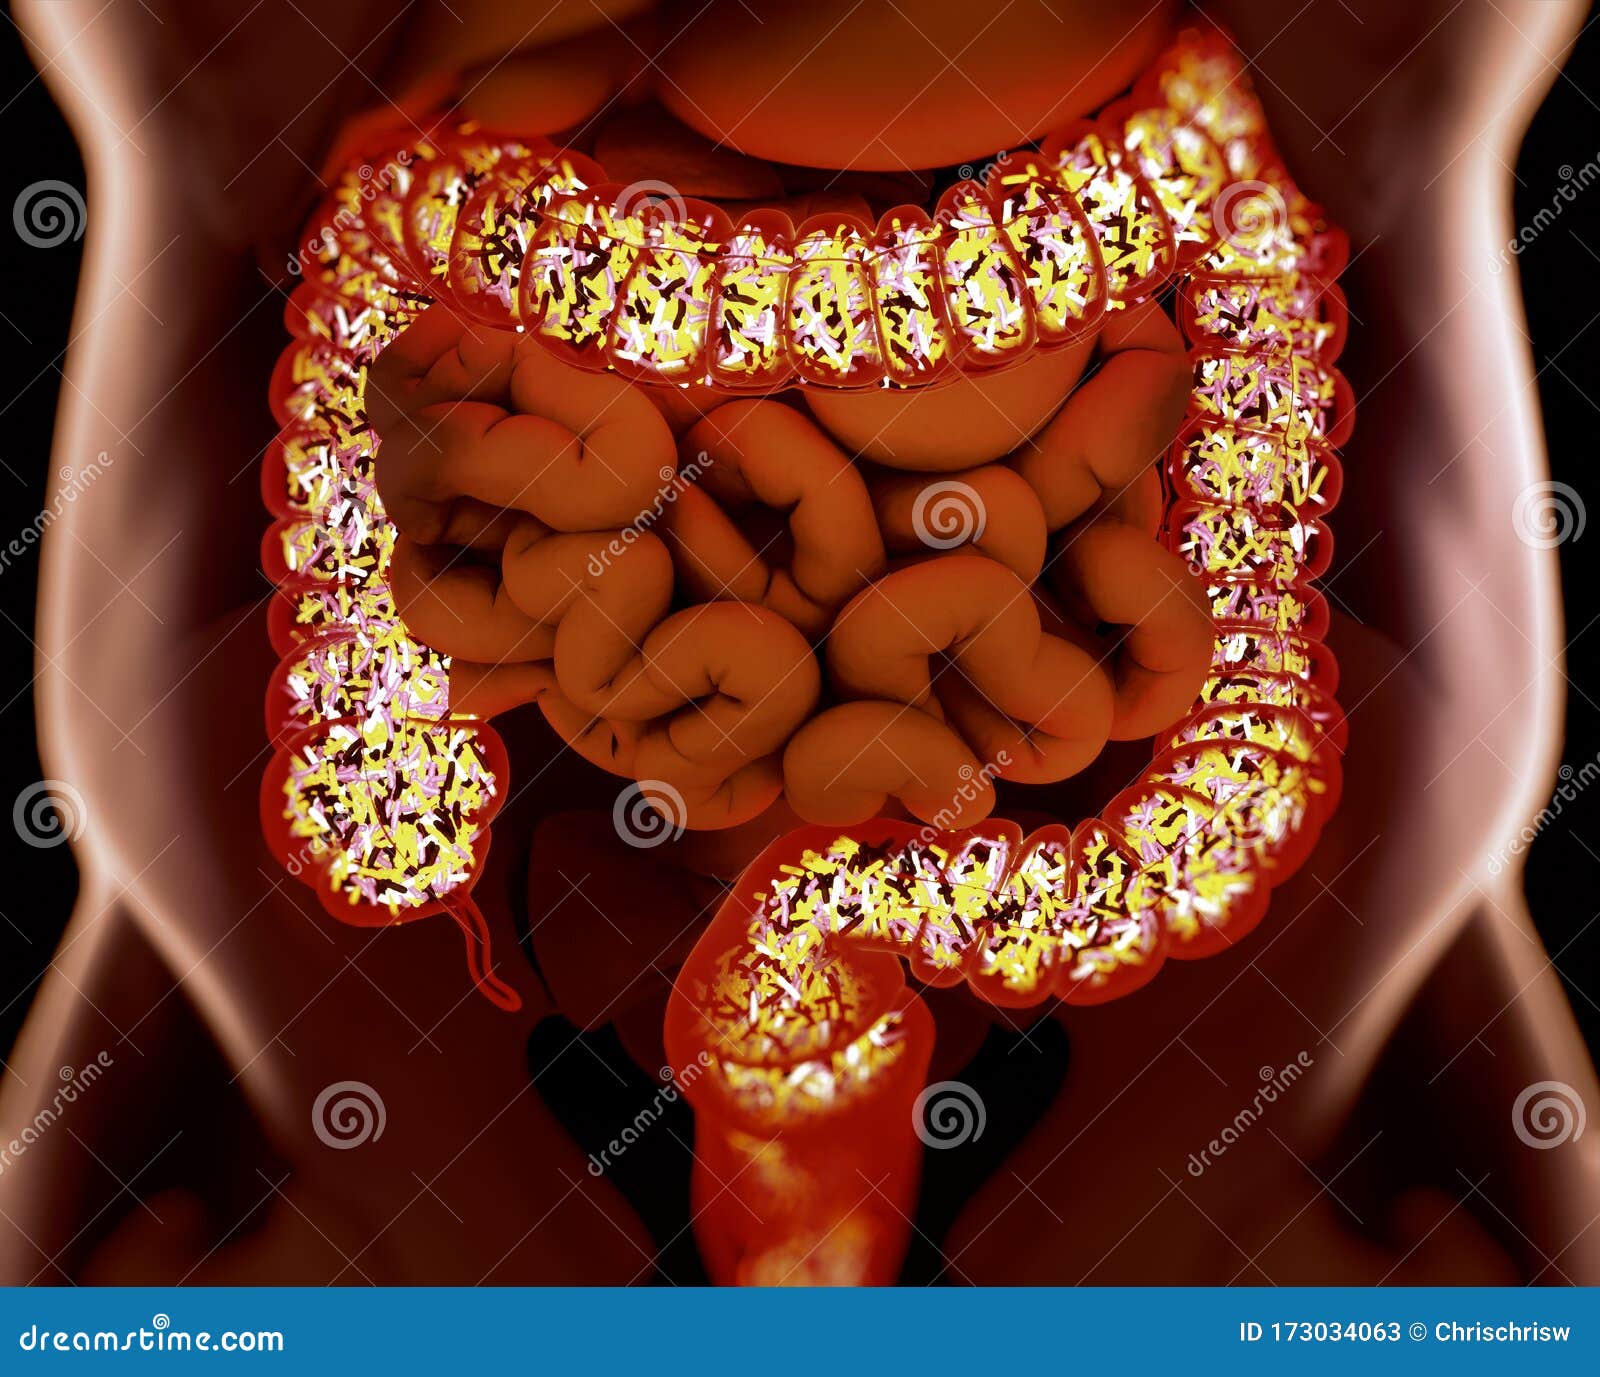 gut bacteria, microbiome. bacteria inside the large intestine, concept, representation.